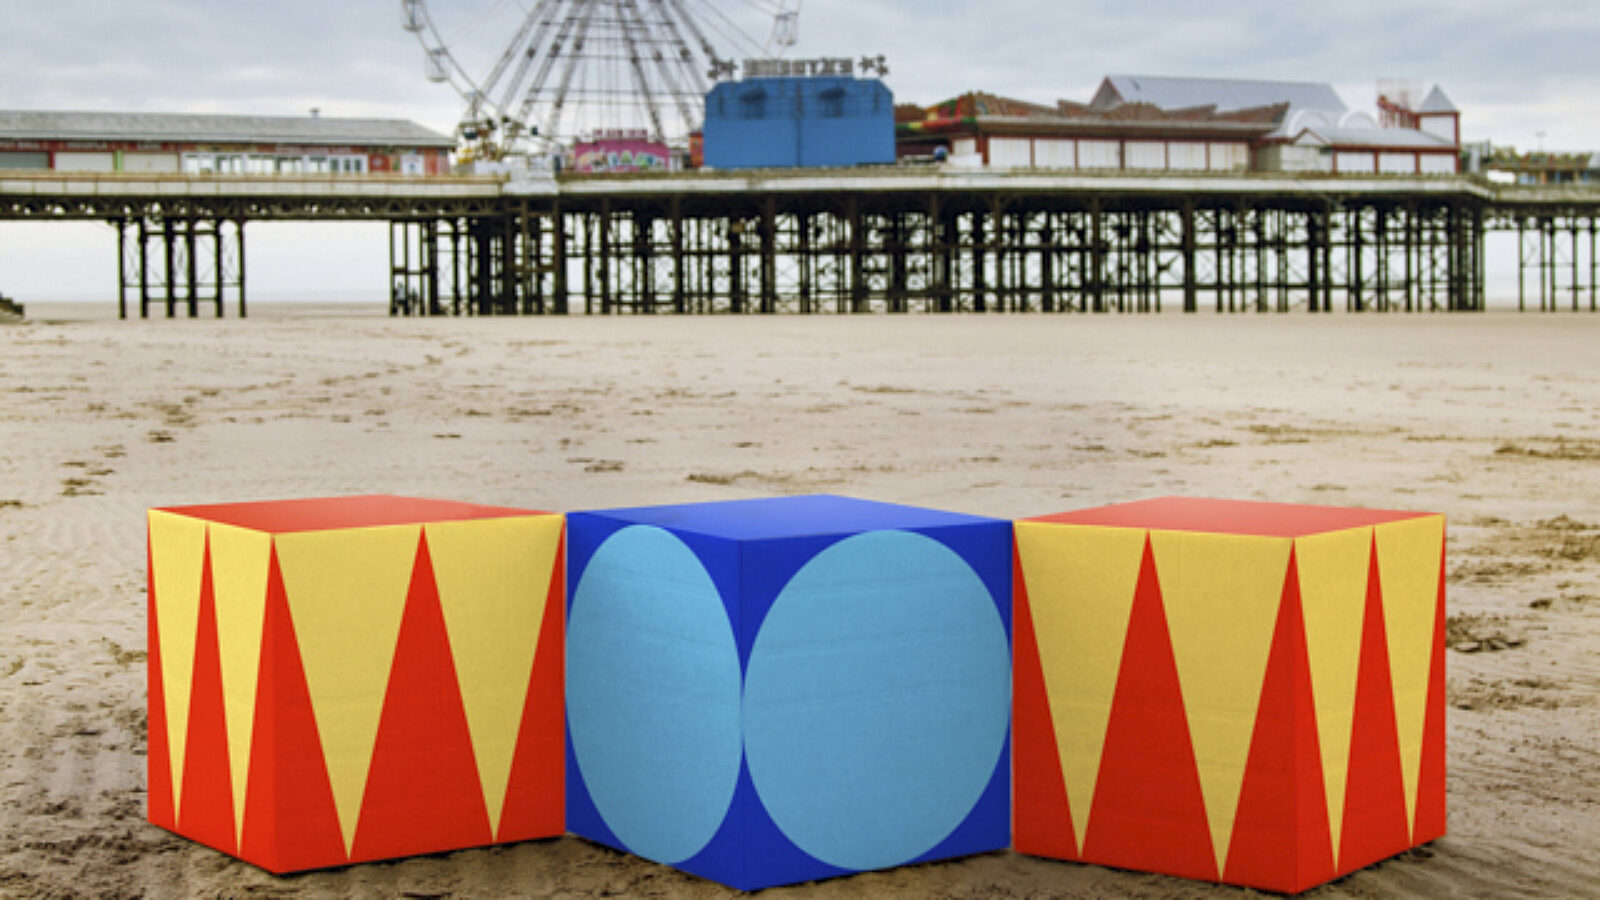 Three Showtown branding blocks spelling 'Wow' sat on the beach, in front of the pier.